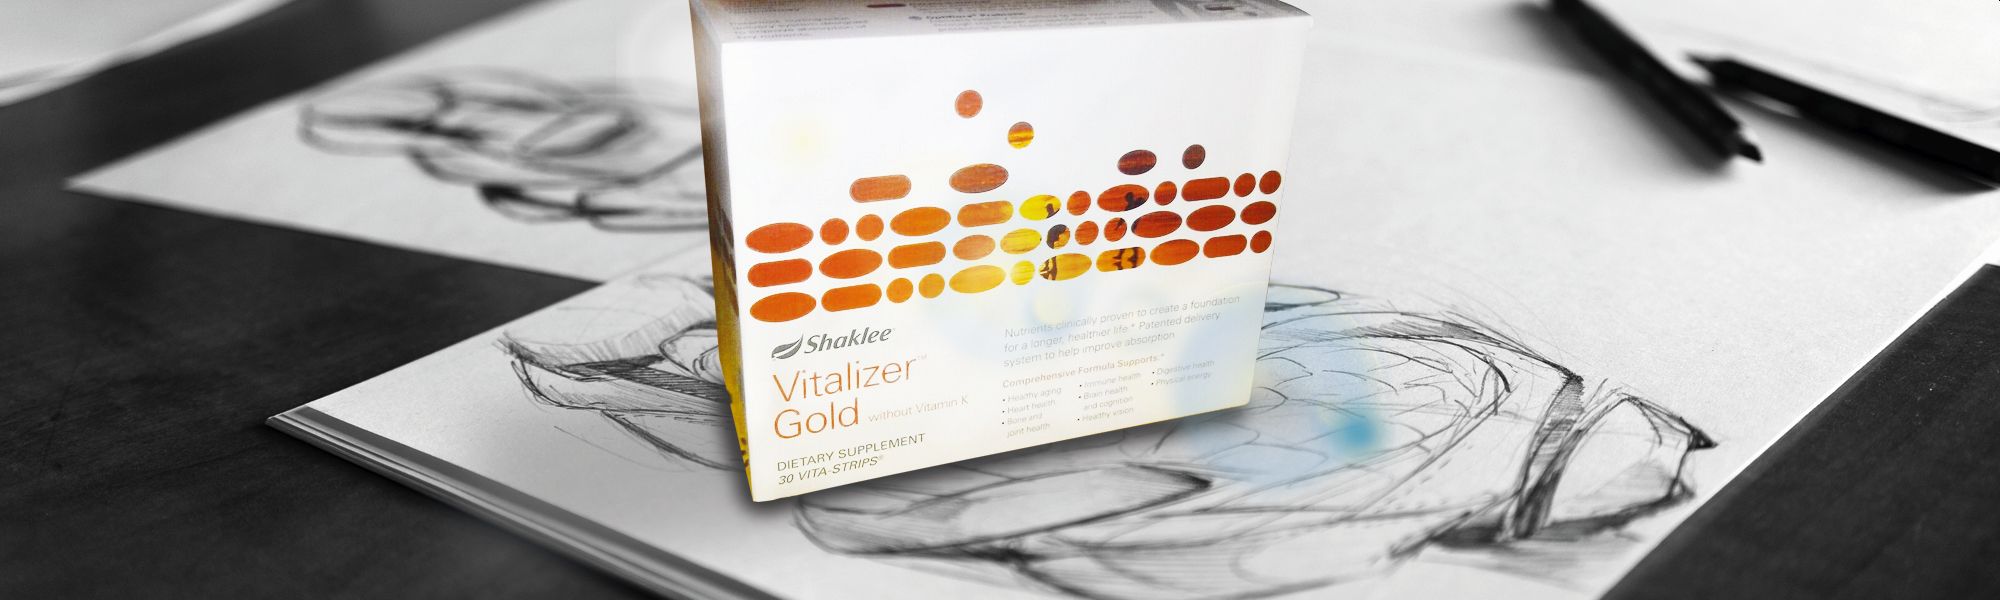 Shaklee Vitalizer Gold Review